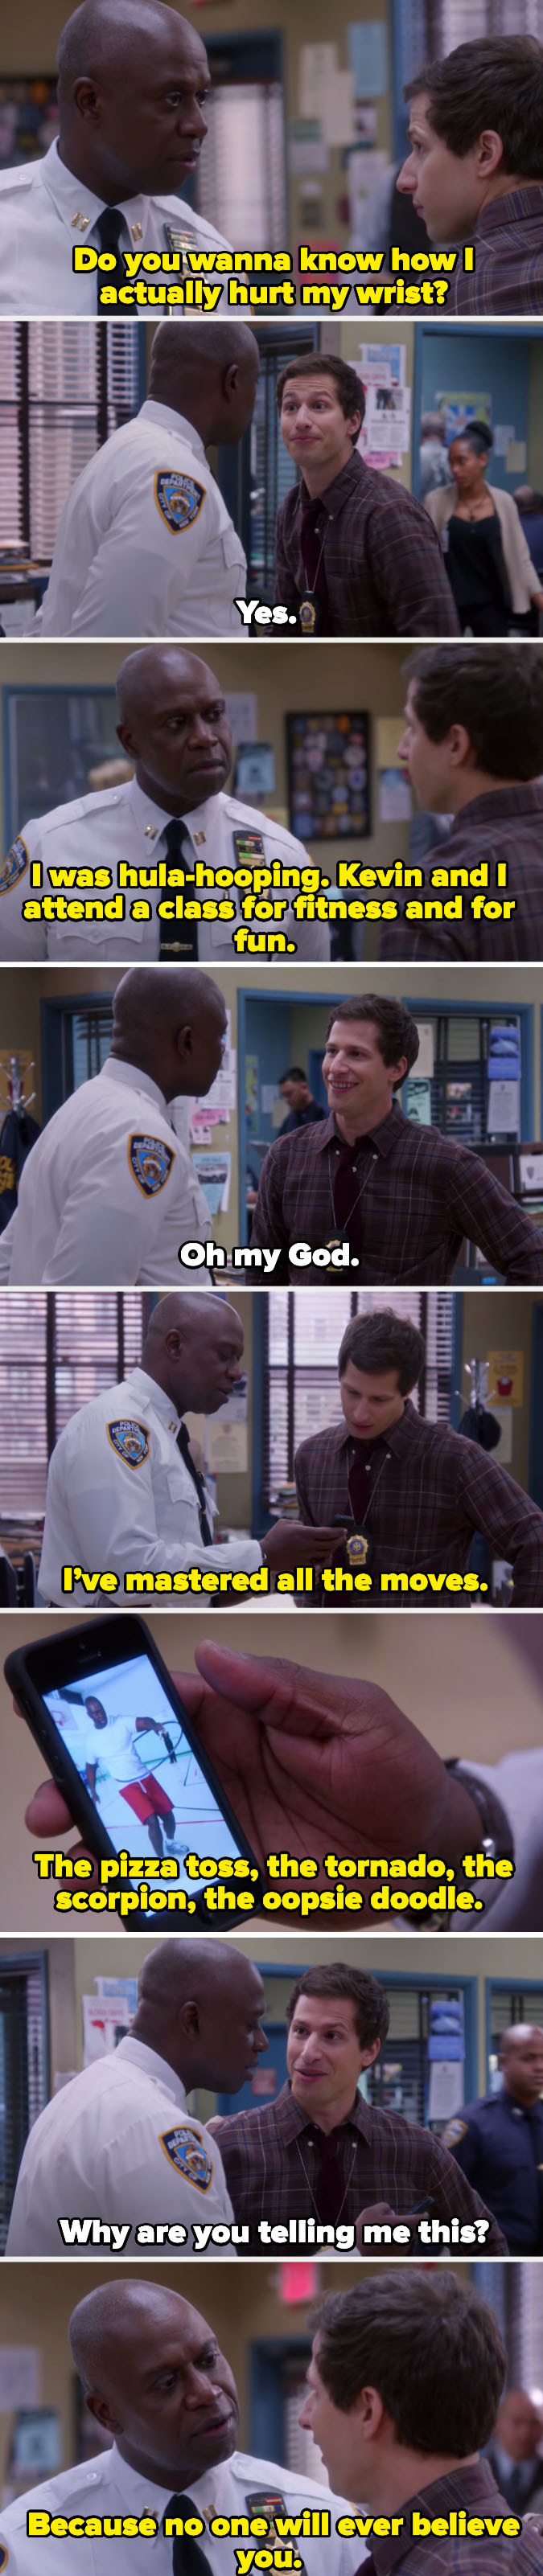 Captain Holt explaining to Jake that he broke his wrist hula-hooping with his husband, and saying he only told Jake because no one would ever believe him